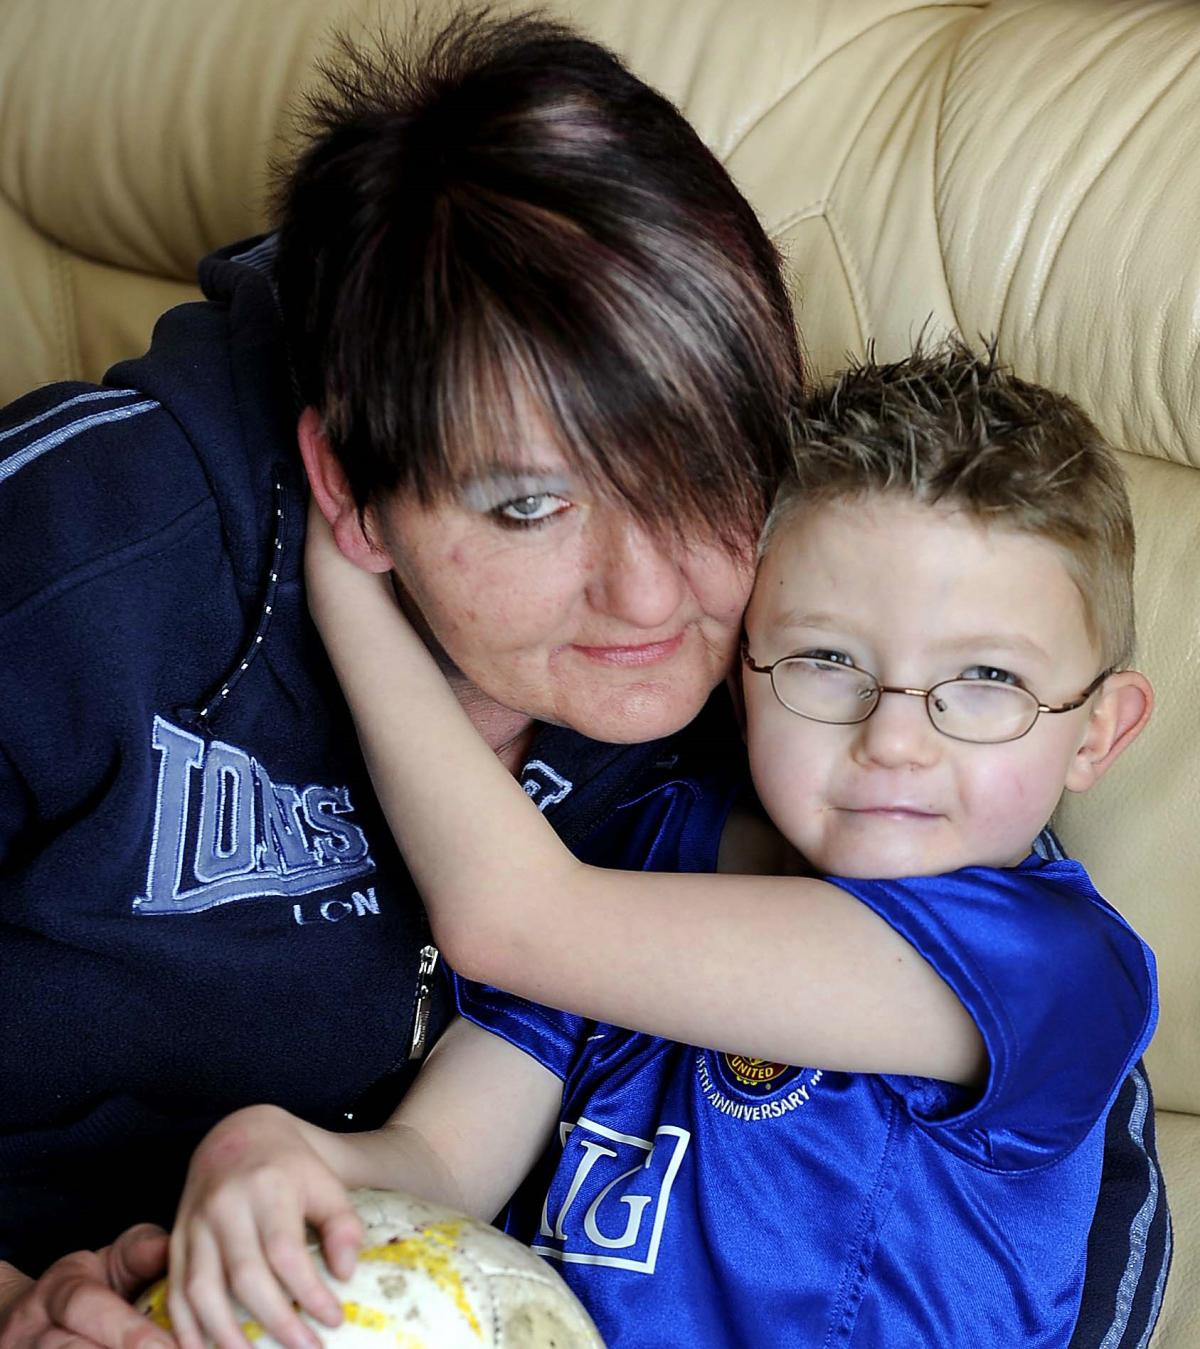 A Bradford mum has had to make the decision any parent would dread. Shelly Turpin has consented for her son Joshua to undergo a major operation within six months, which could kill him. 